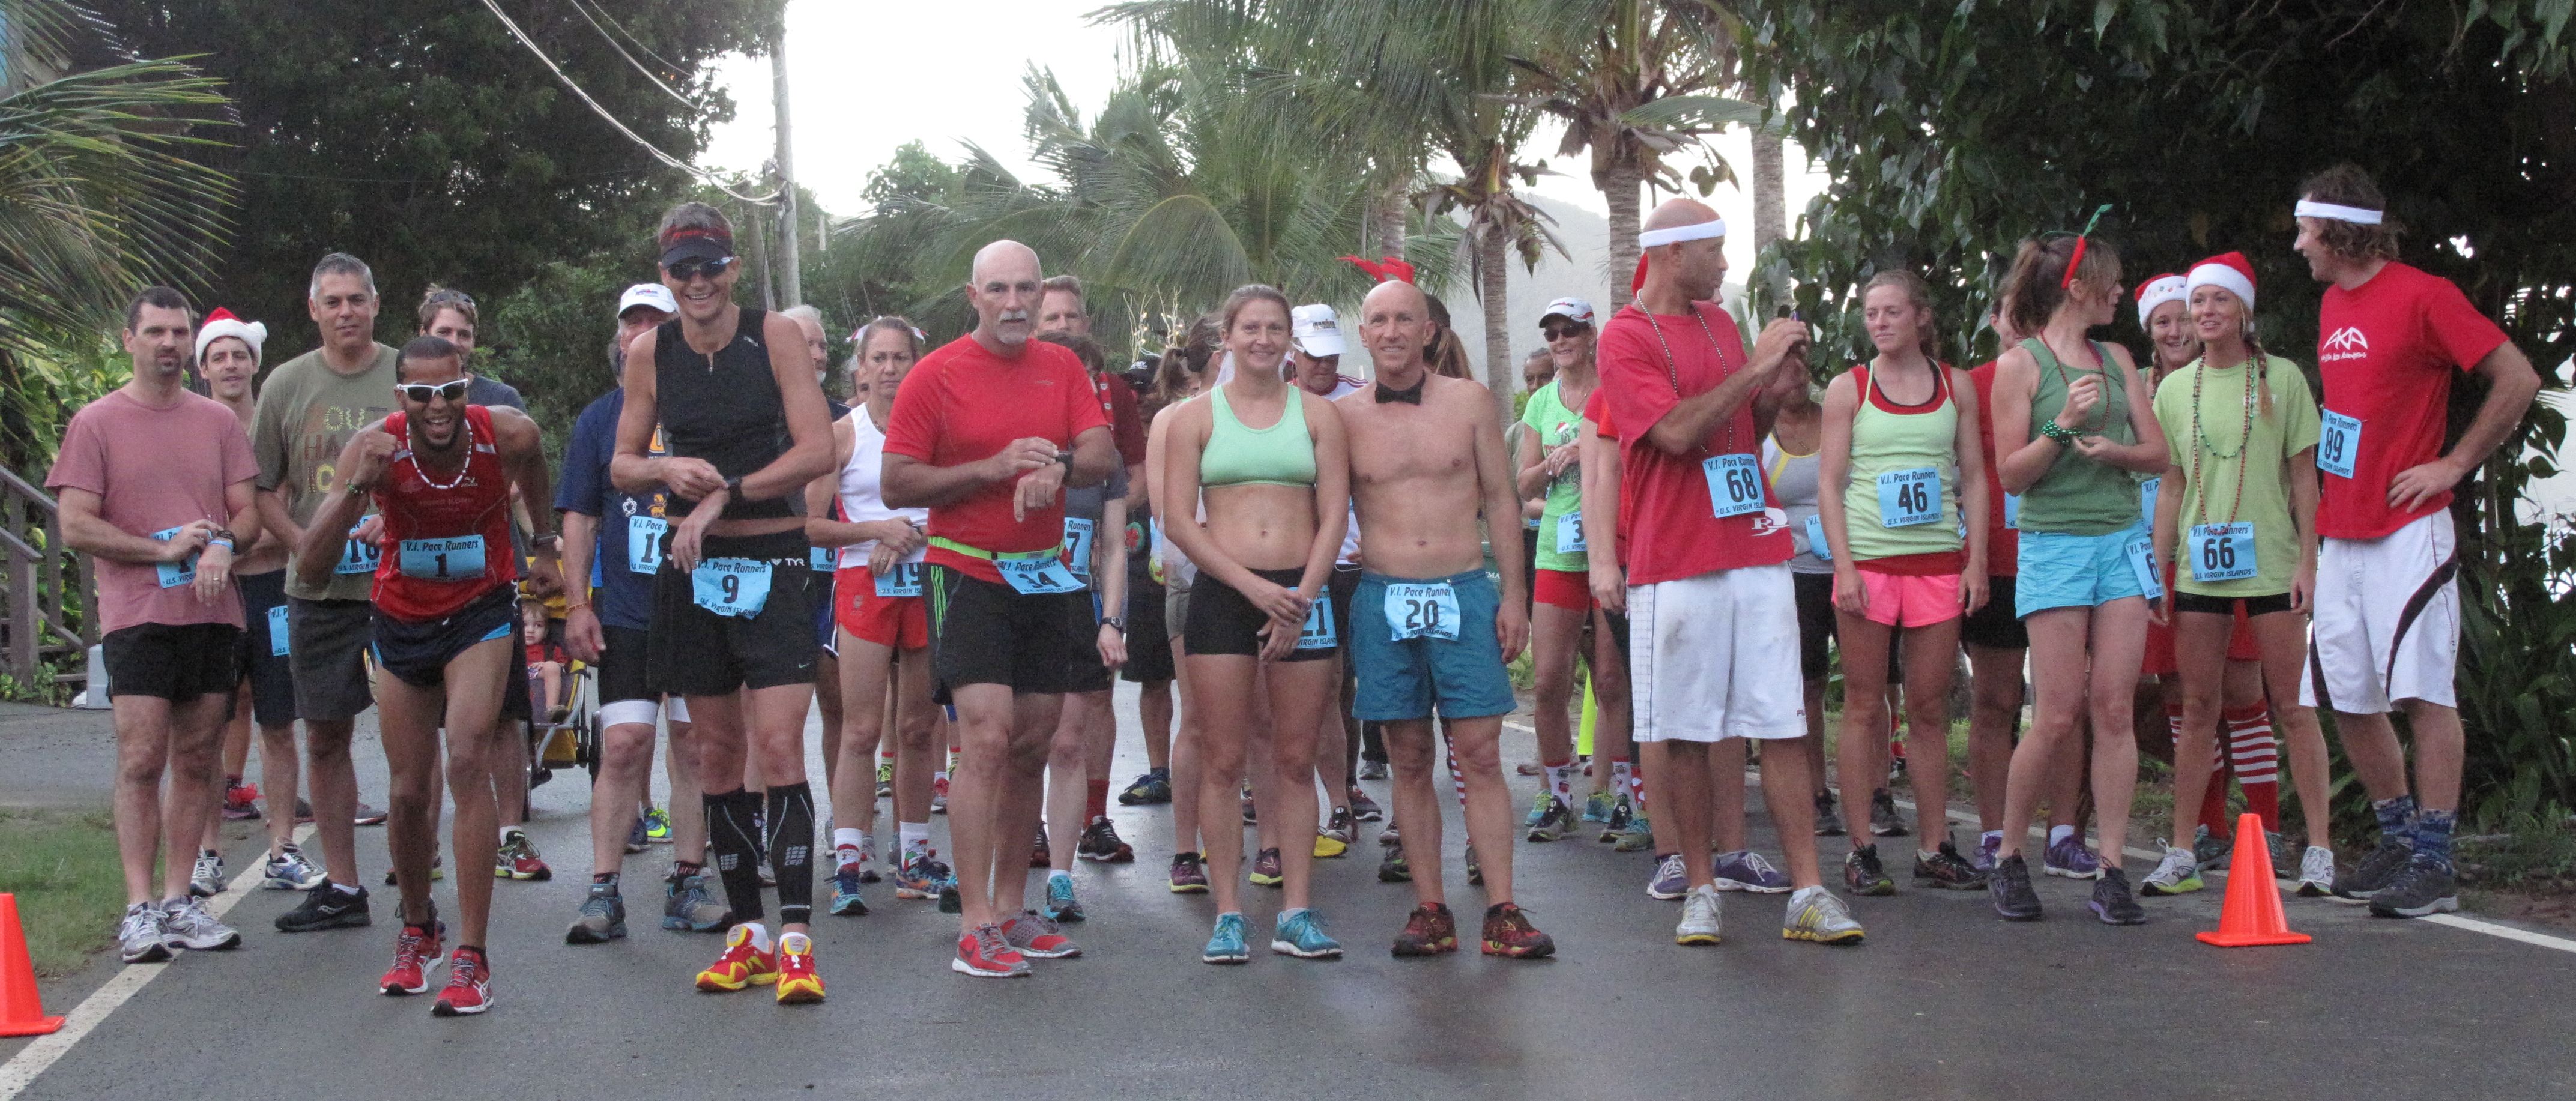 The start of the Cane Bay 5-Mile Road Race on Sunday, Dec. 22